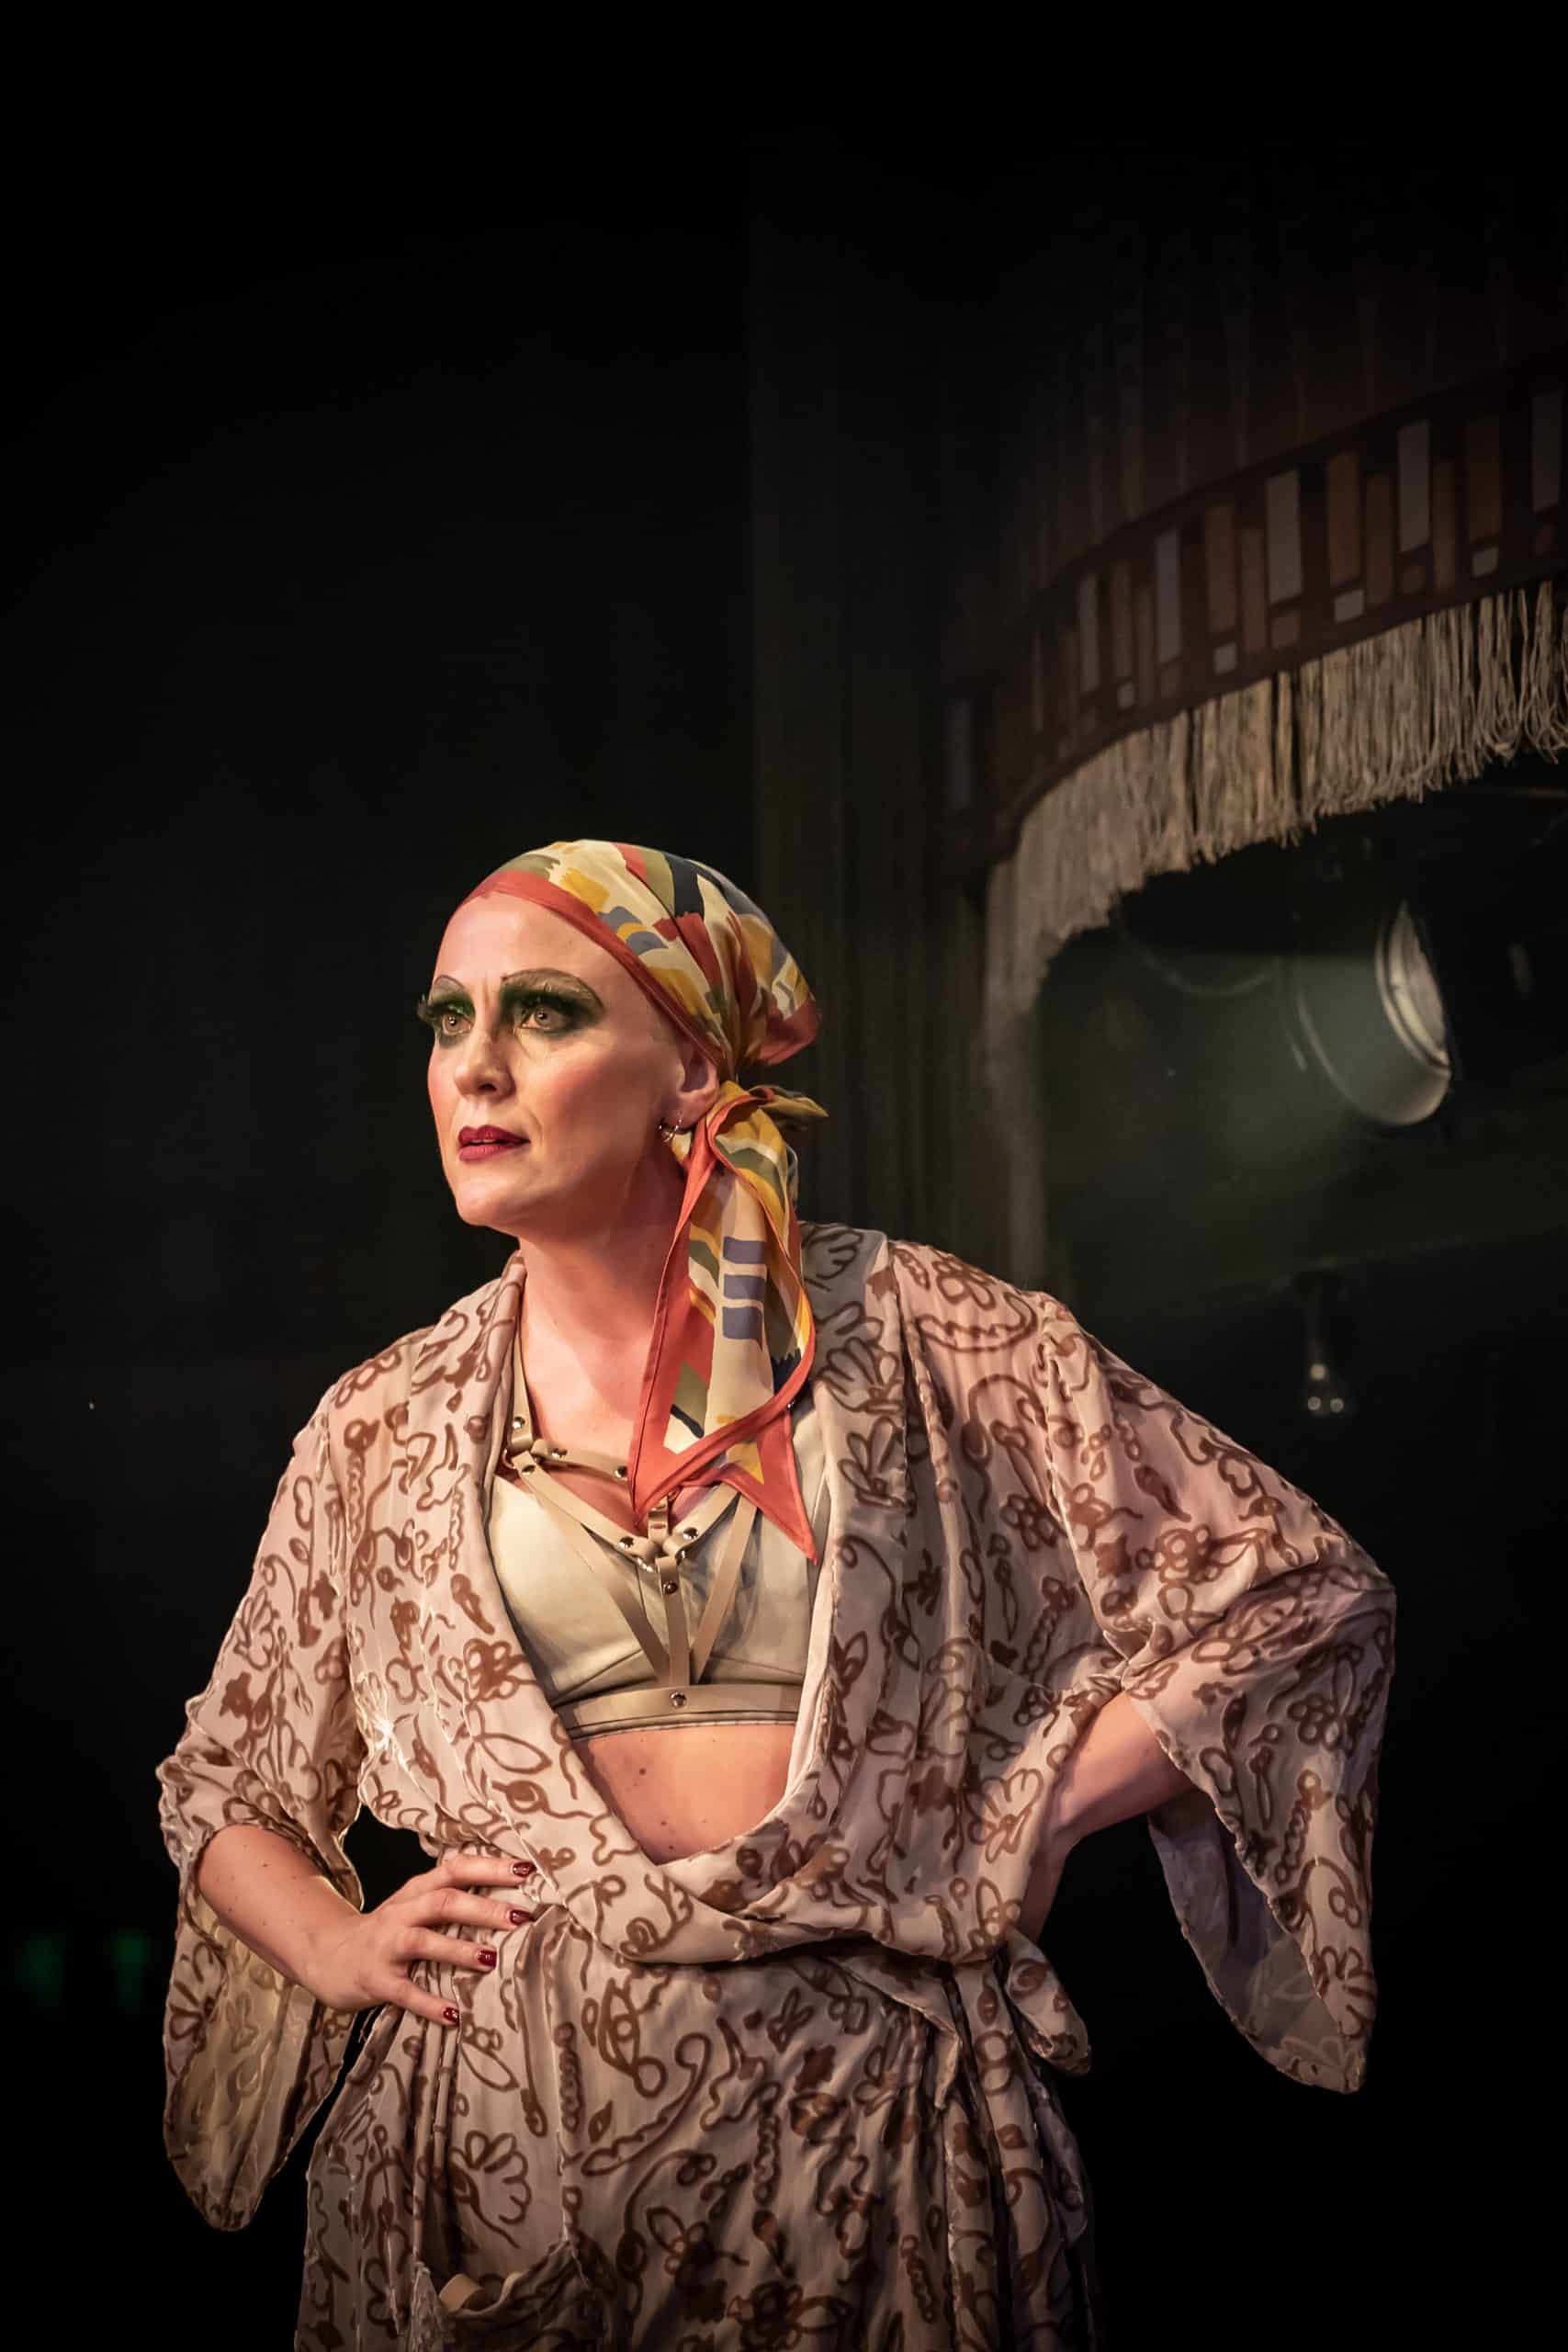 Jessica Kirton as Fraulien Kost in Cabaret at the Kit Kat Club, London. She wears a colourful headscarf and patterned dressing gown